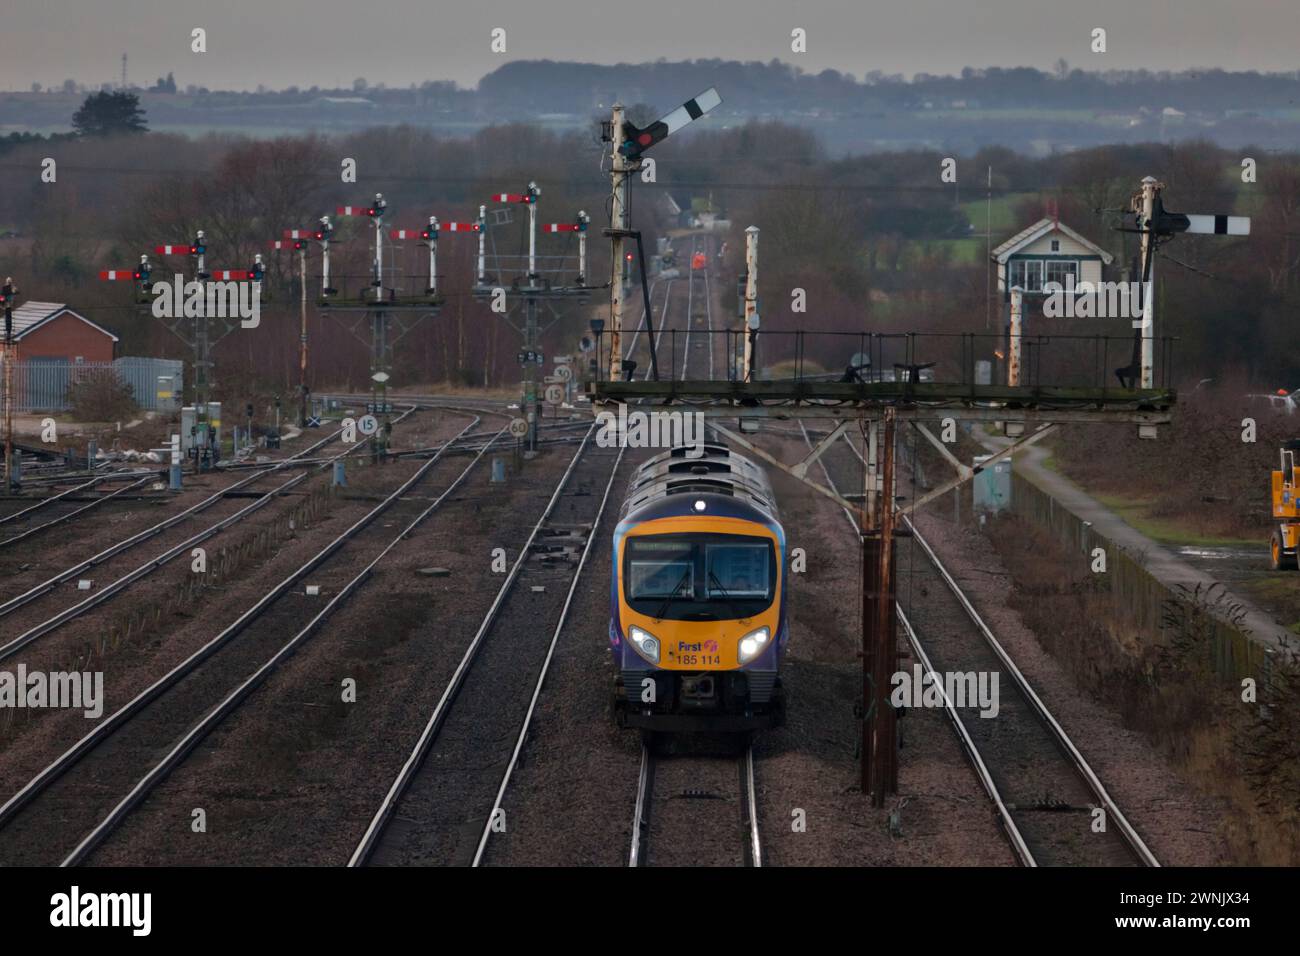 First Transpennine Express Siemens class 185 diesel train 185114 passing the large semaphore bracket signal at Wrawby Junction Barnetby, Lincs, UK Stock Photo